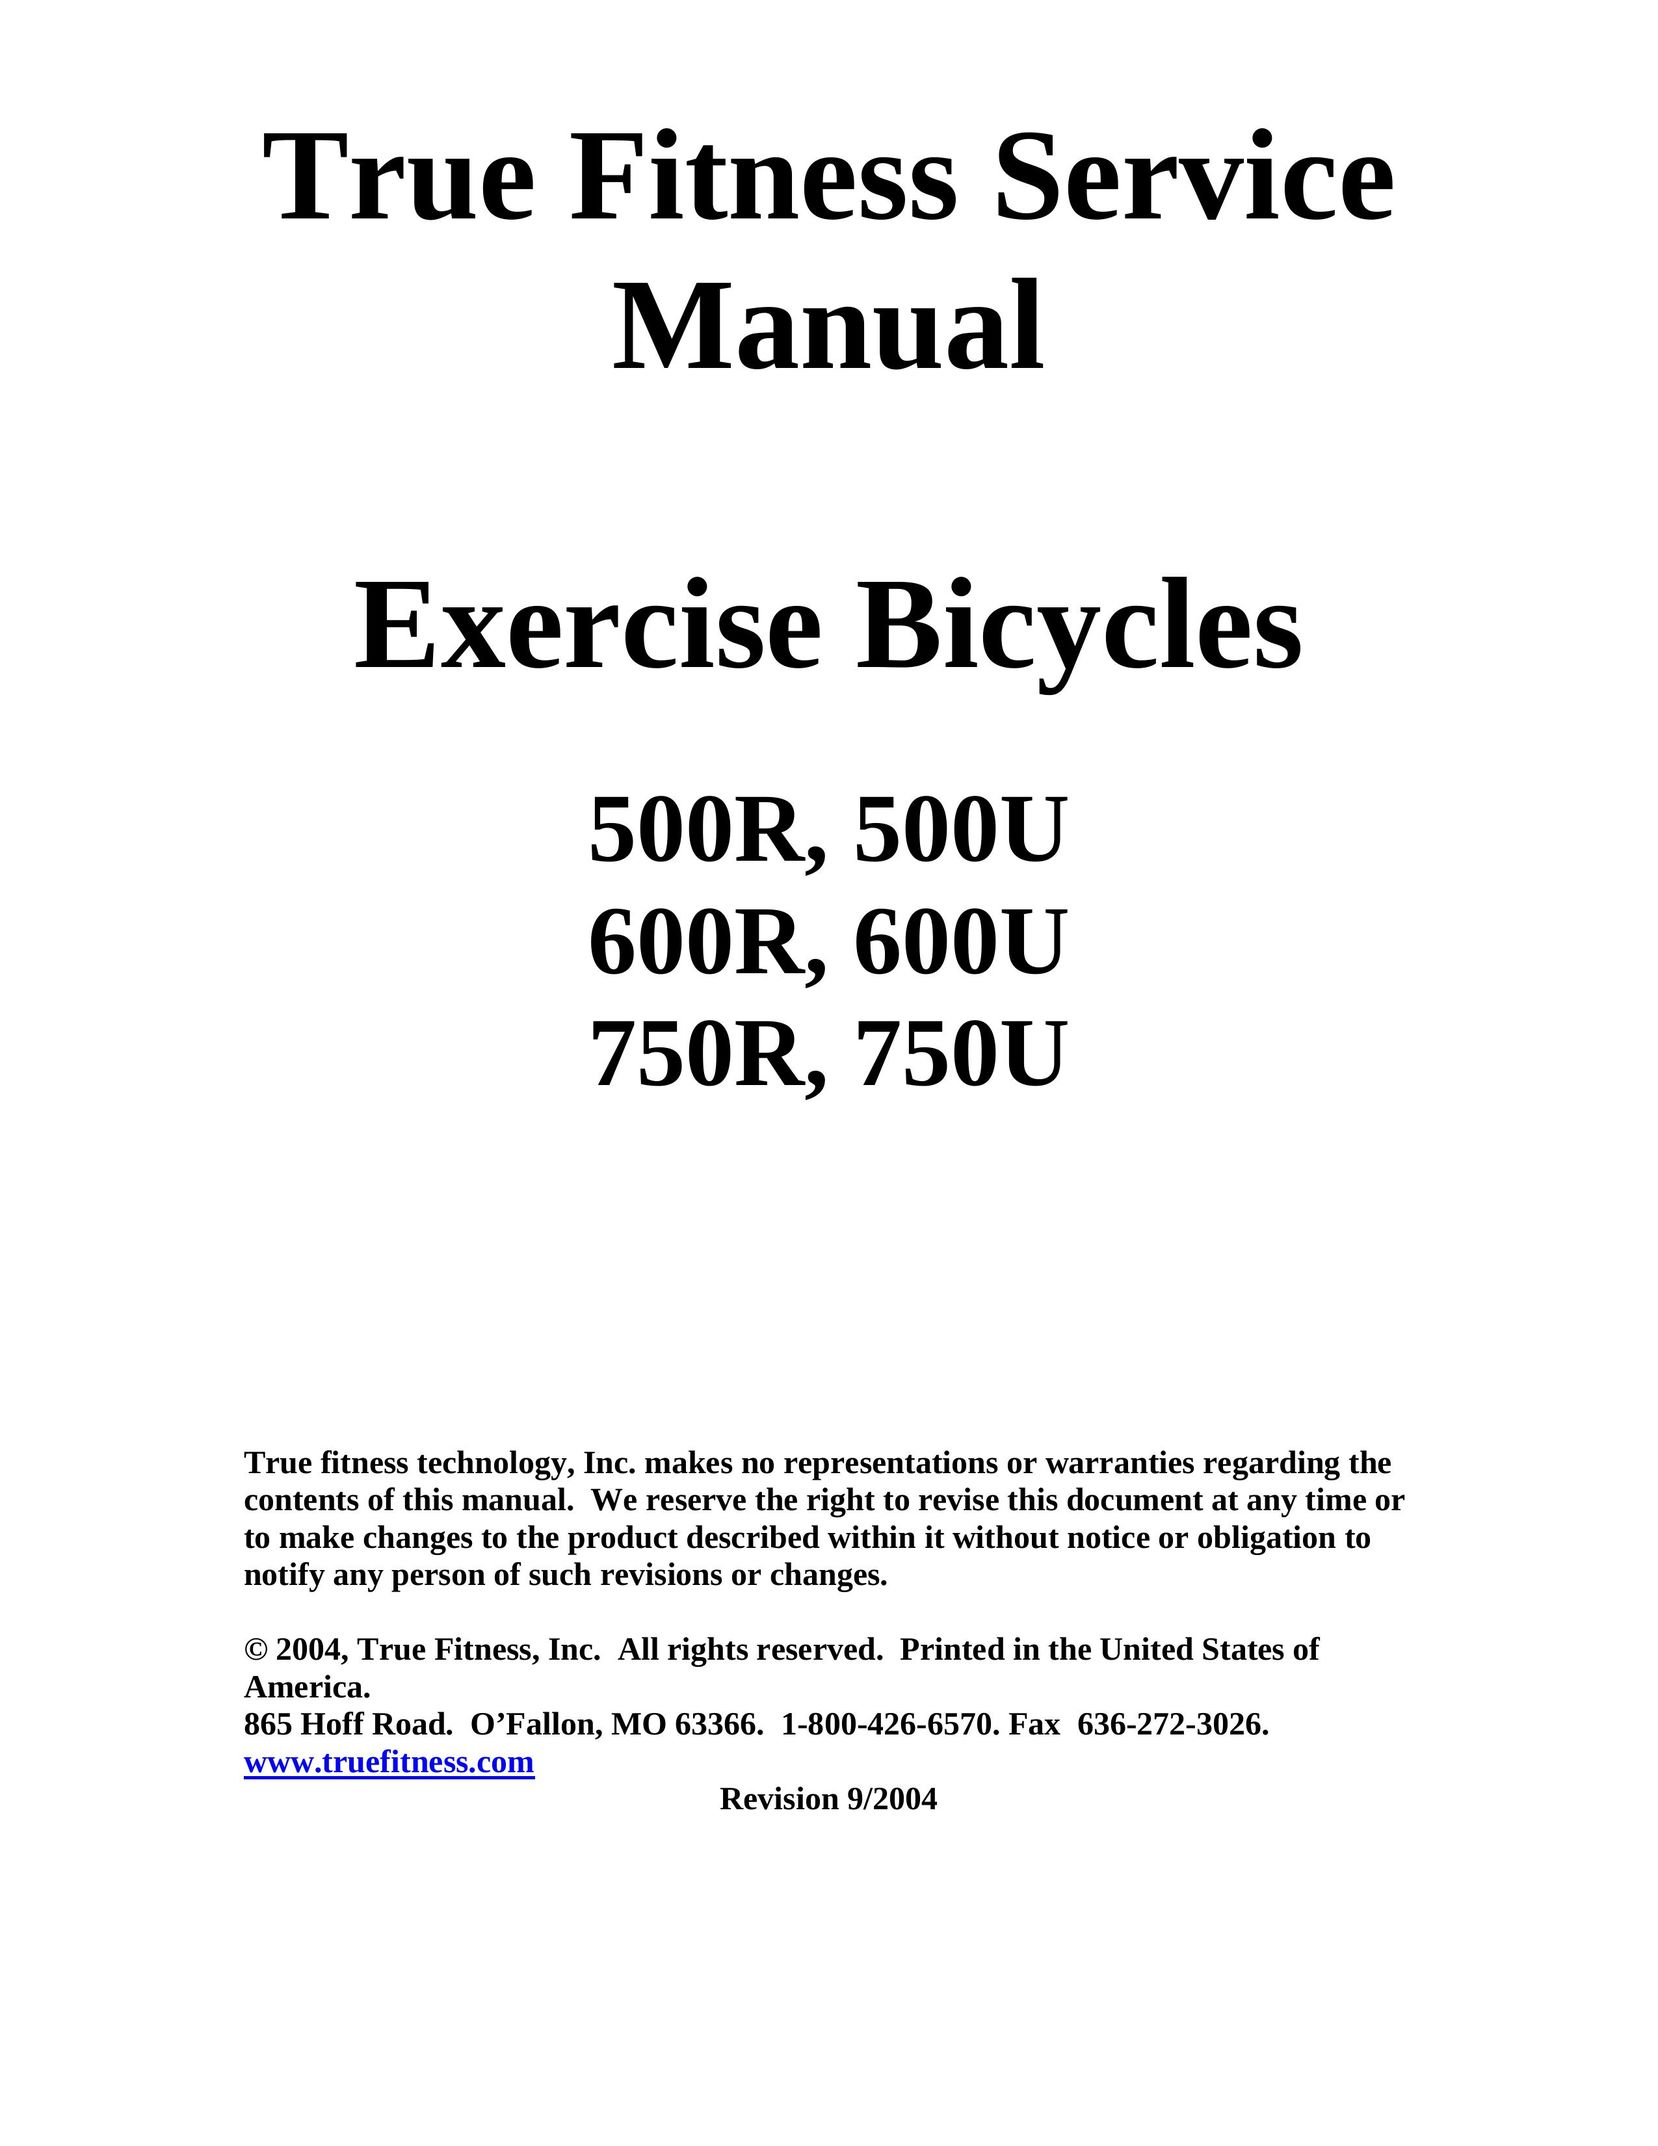 True Fitness 500R Bicycle User Manual